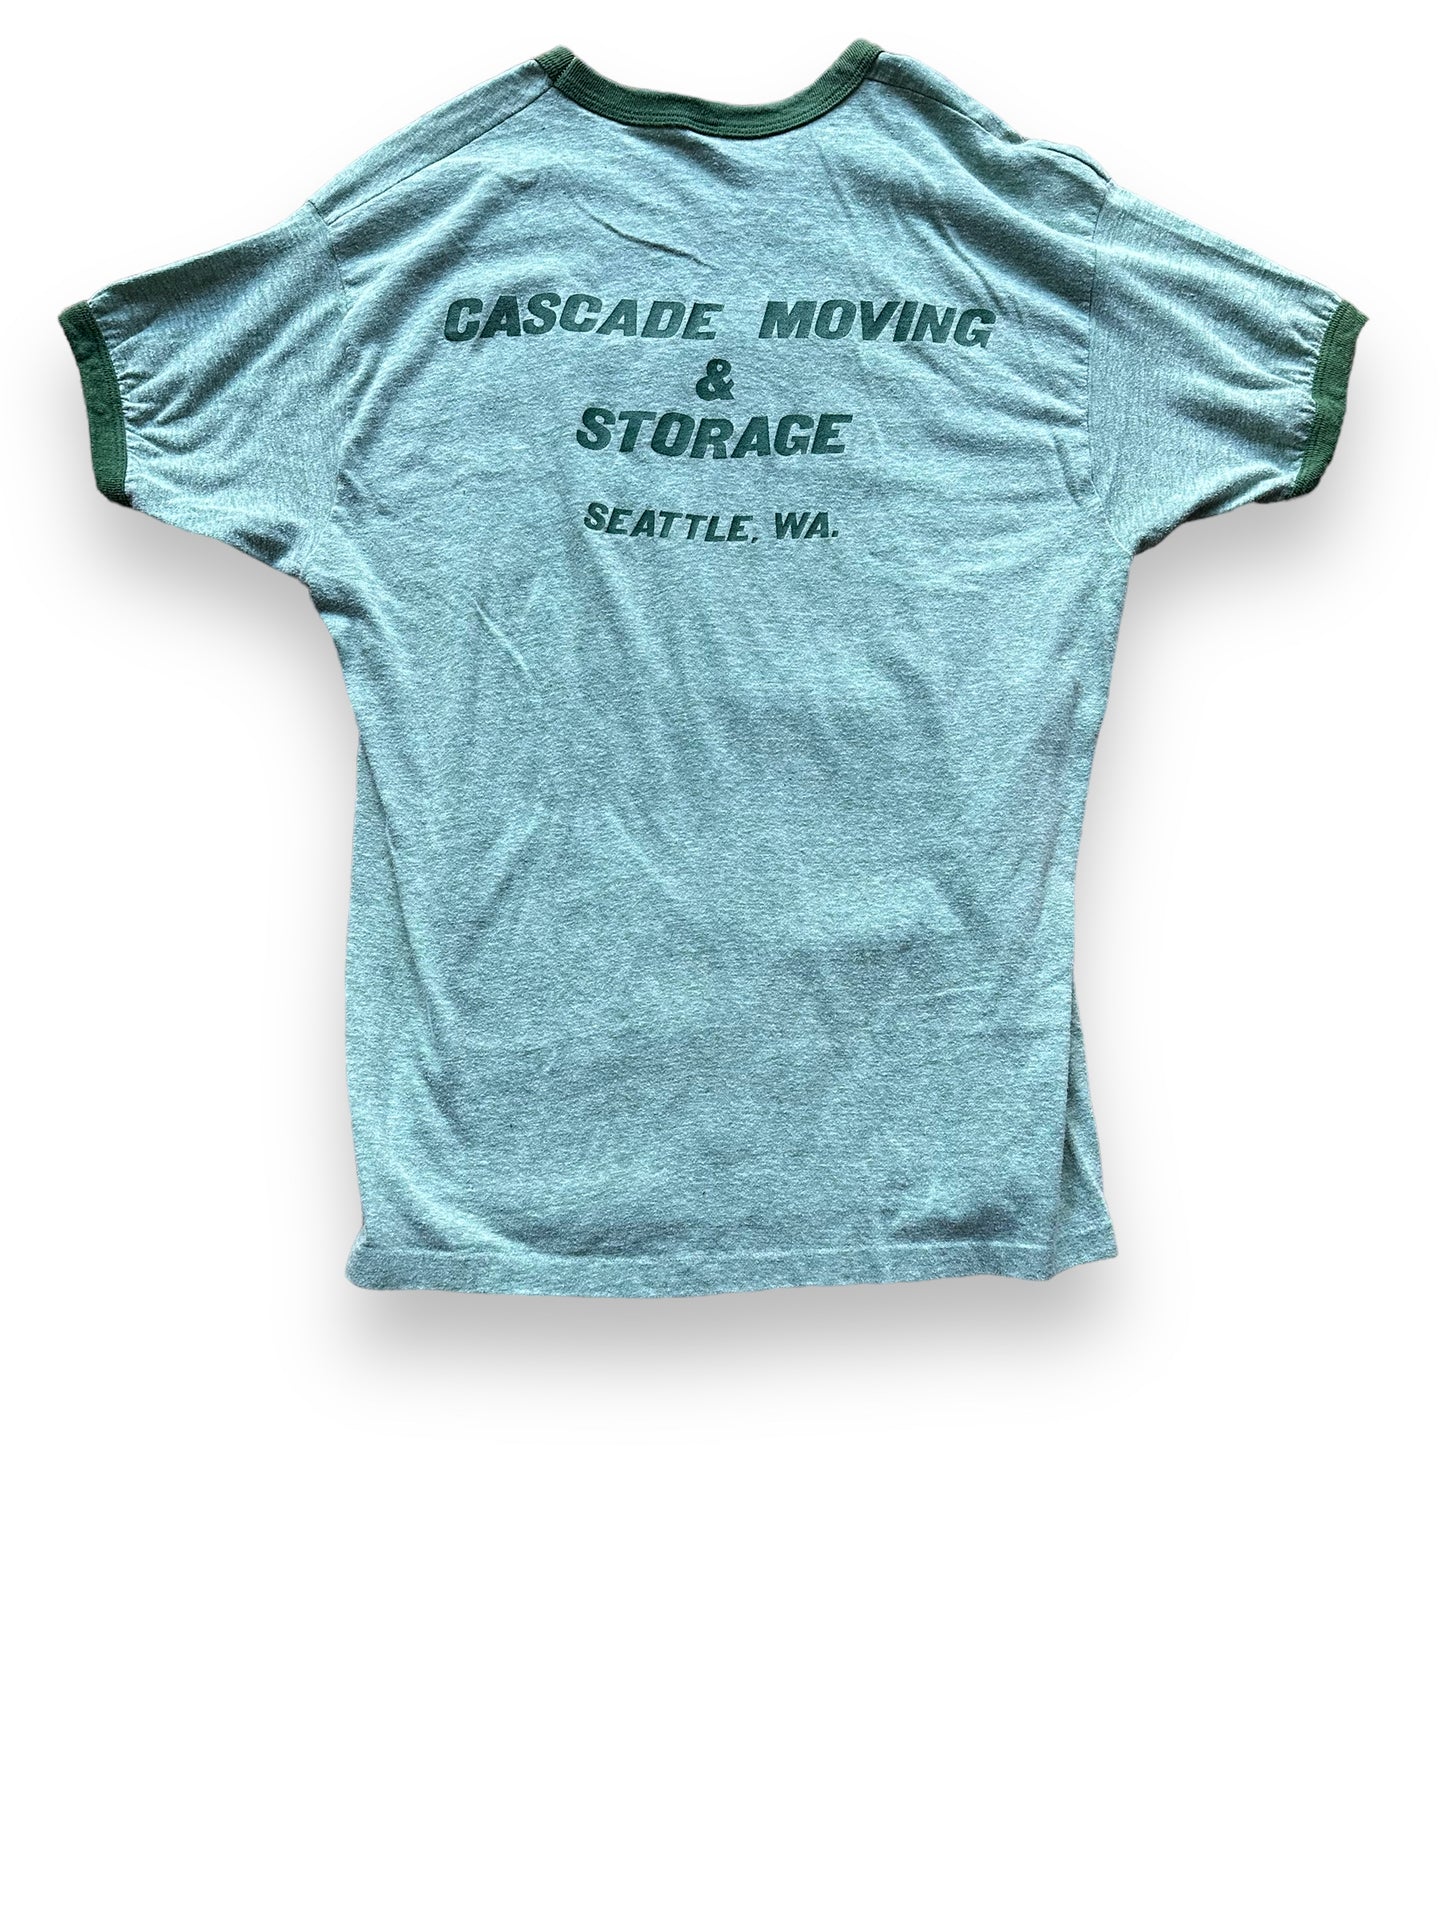 Rear View of Vintage Cascade Moving Green Ringer Tee SZ XL | Vintage Graphic T-Shirts Seattle | Barn Owl Vintage Tees Seattle